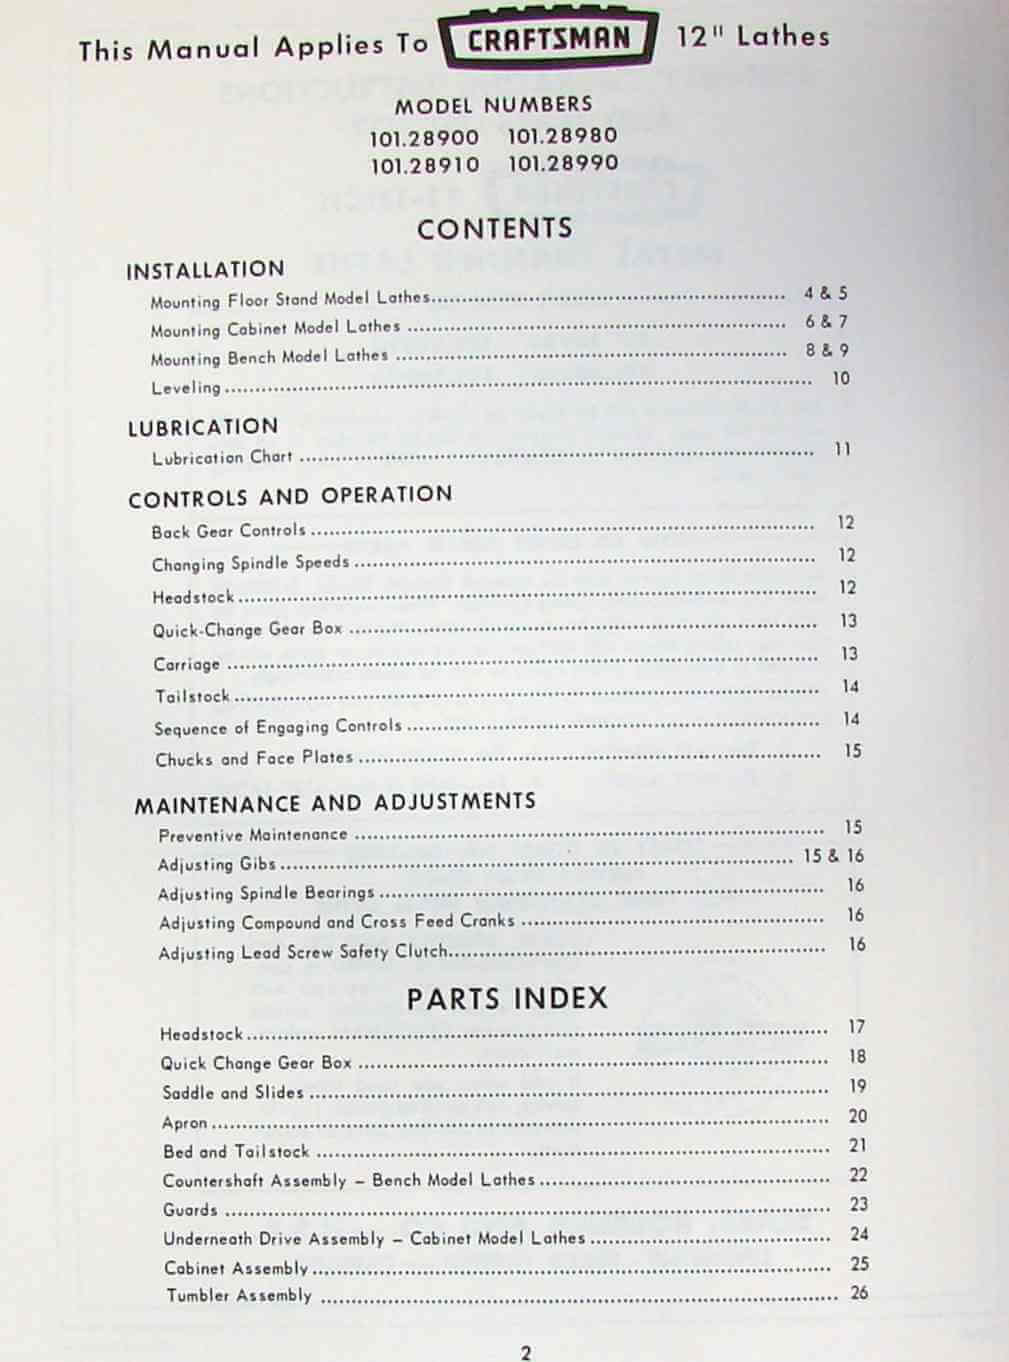 Craftsman 12" Metal Lathe Operating Manual and Parts List 101.28980 & 101.28990